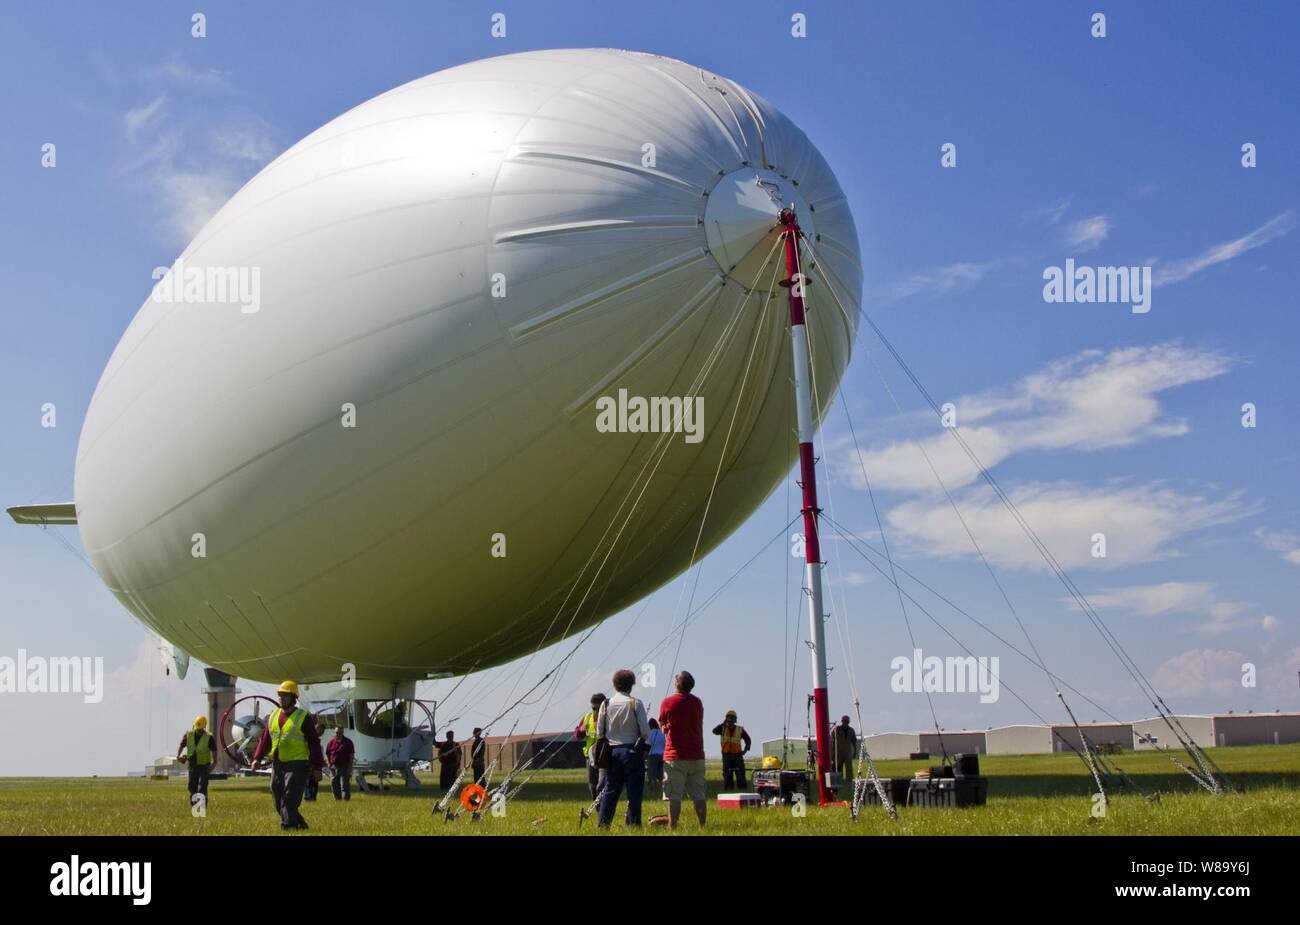 A U.S. Navy MZ-3A manned airship, Advanced Airship Flying Laboratory, derived from the commercial A-170 series blimp, lands at Lake Front Airport in New Orleans, La., to provide logistical support for the Deepwater Horizon Response Unified Command and the Gulf of Mexico oil spill on July 8, 2010.  The Coast Guard requested the support of the Navy vehicle to help detect oil, direct skimming vessels and look for wildlife that may be threatened by oil. Stock Photo